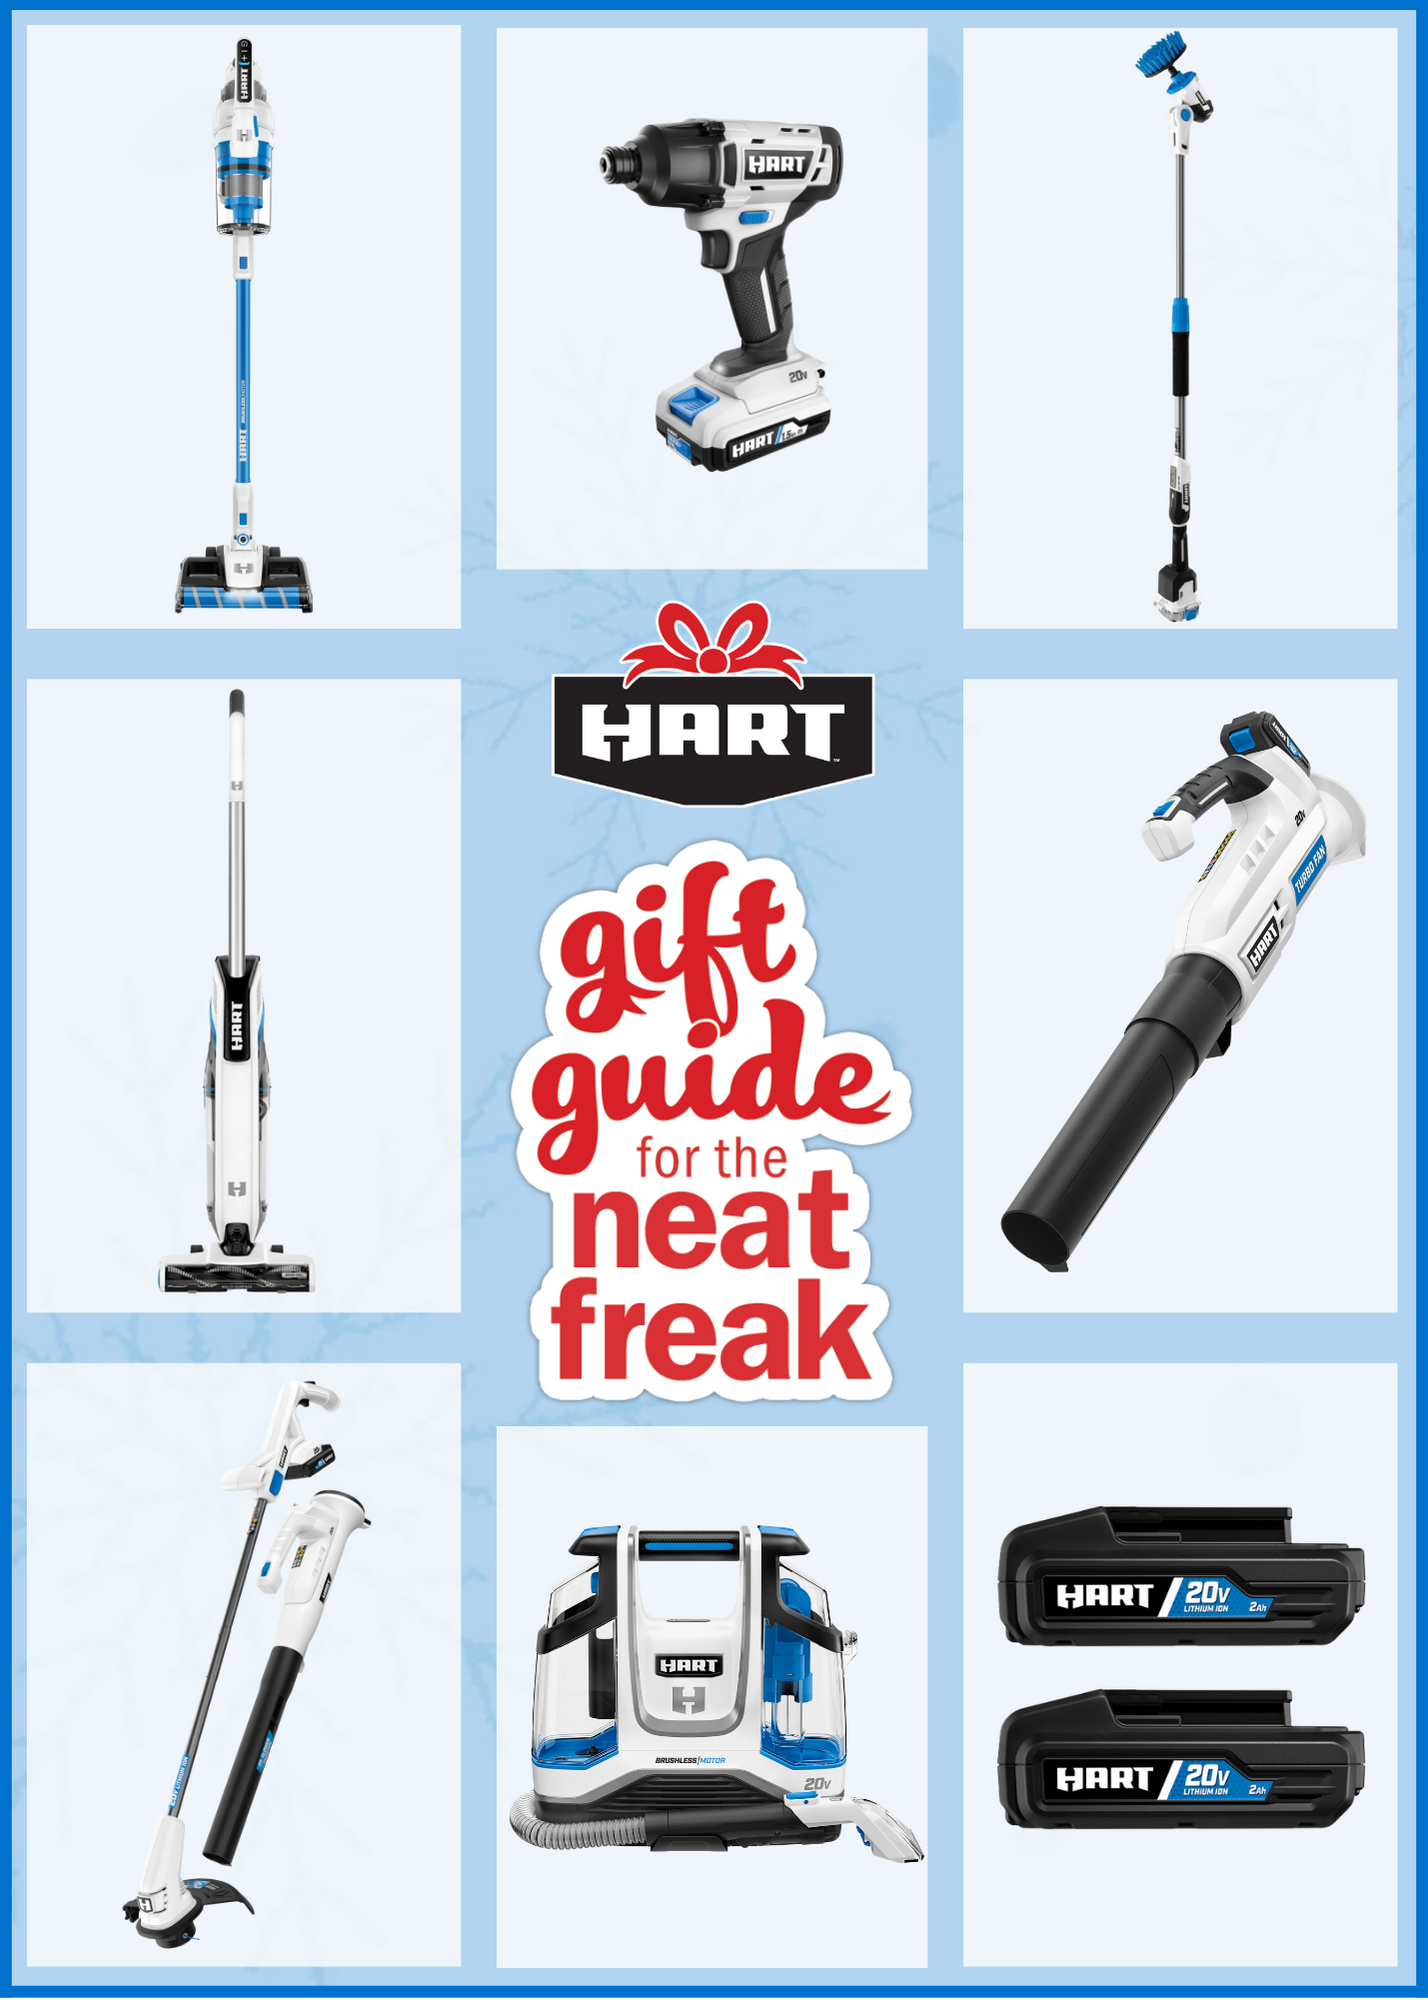 HART Tools Guide to Find Best Gifts for Organizers, Perfect Hosts, or Neat Freaks